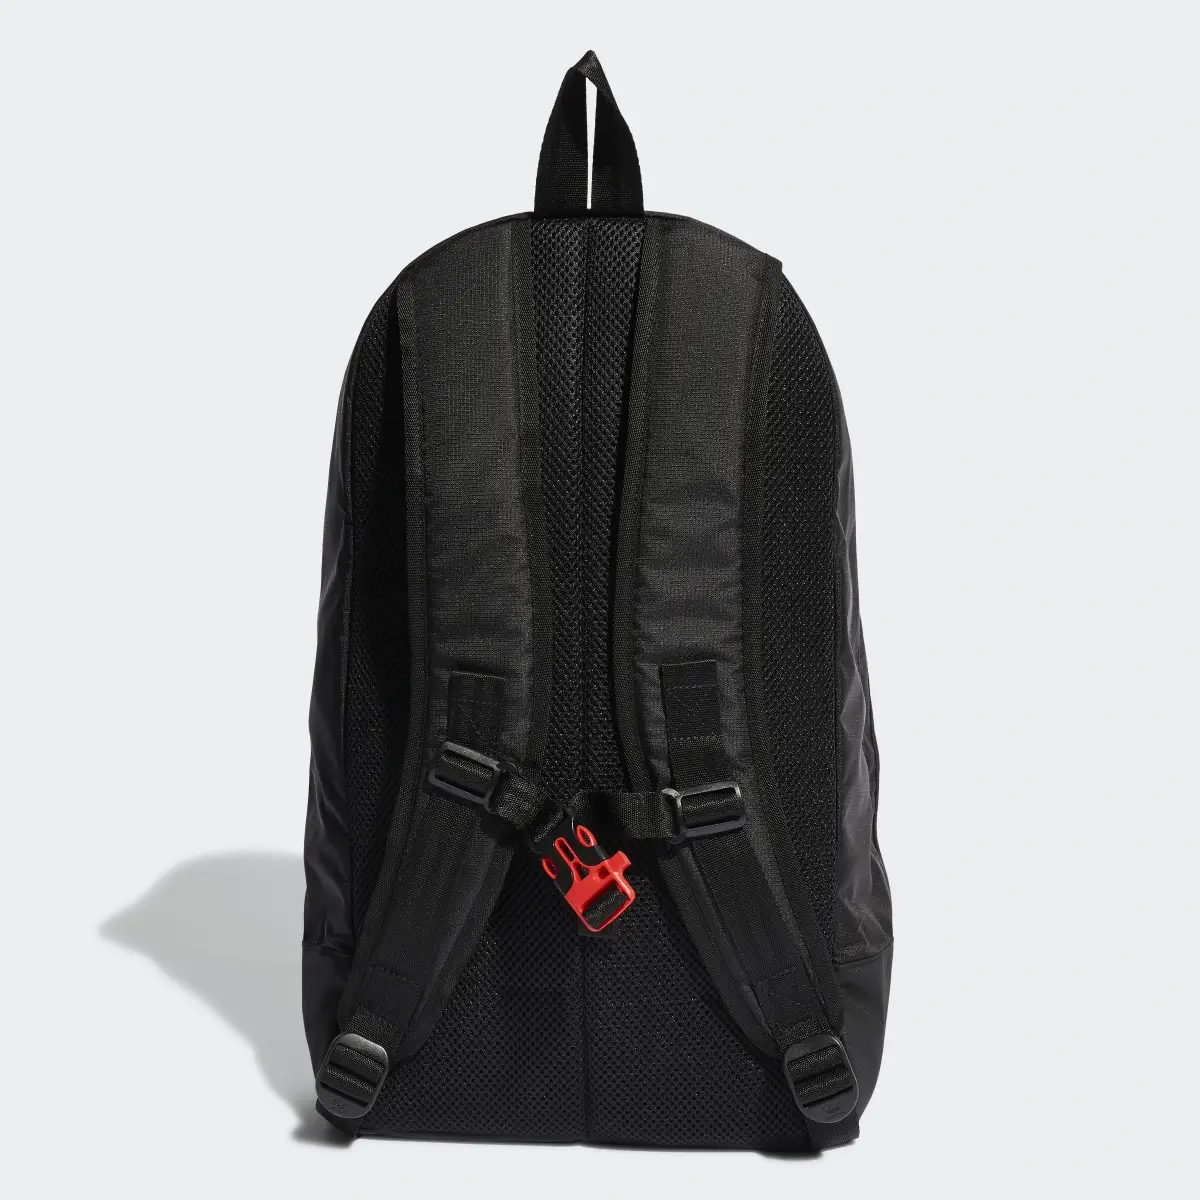 Adidas Adventure Backpack Small. 3